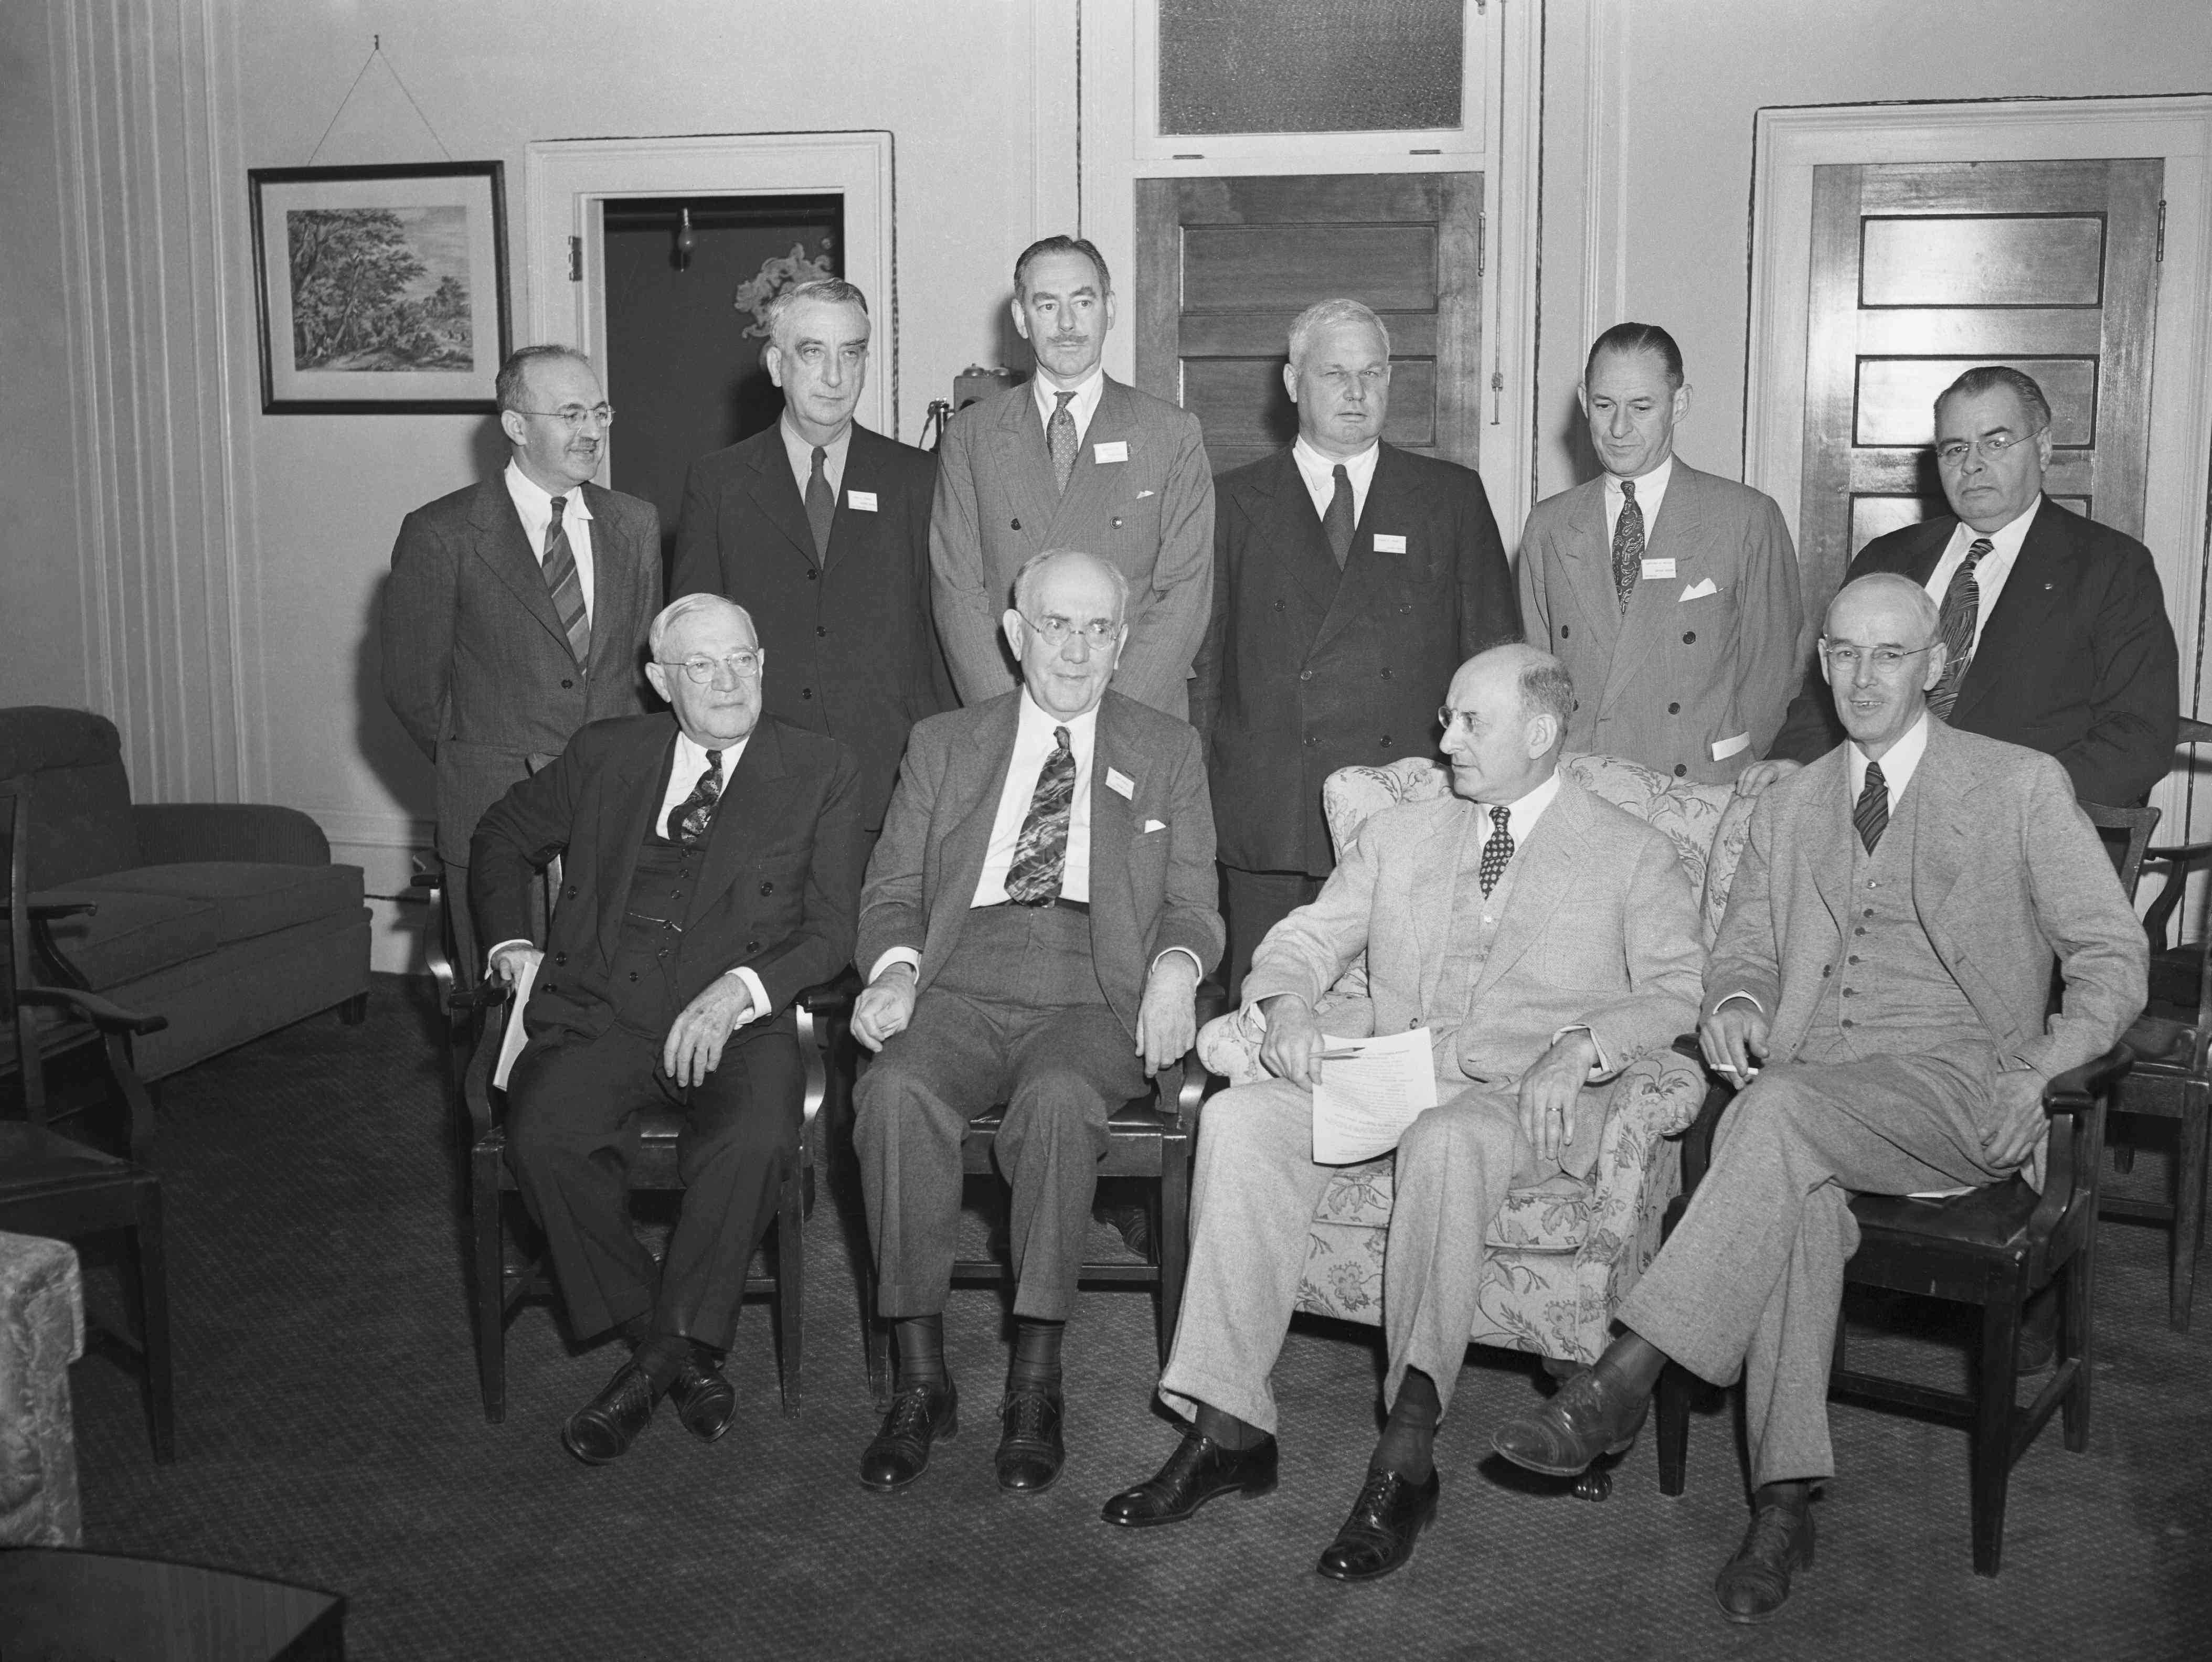 U.S. delegates at the Bretton Woods Conference in Bretton Woods, N.H., with Assistant Secretary of the Treasury Harry Dexter White standing far left.